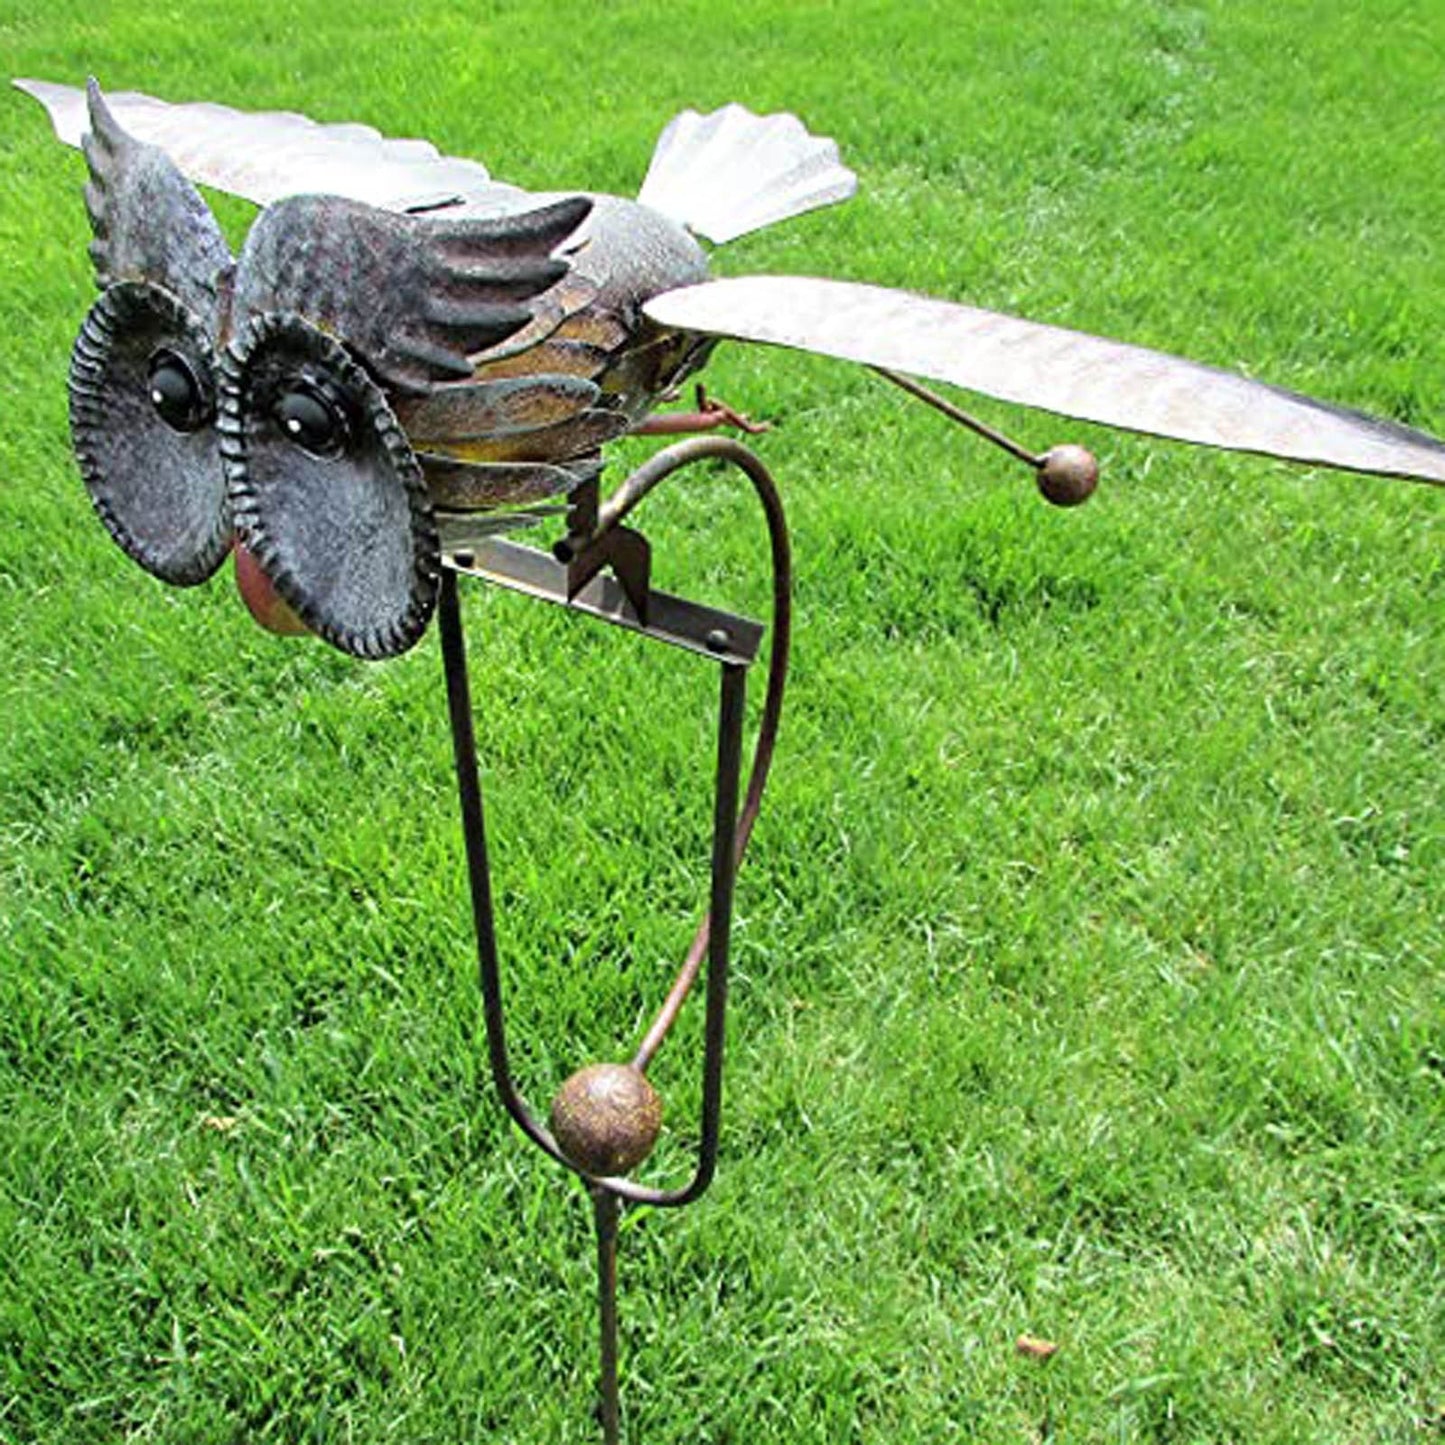 Flying Bird Scarer Garden Decoration Wing Flapping